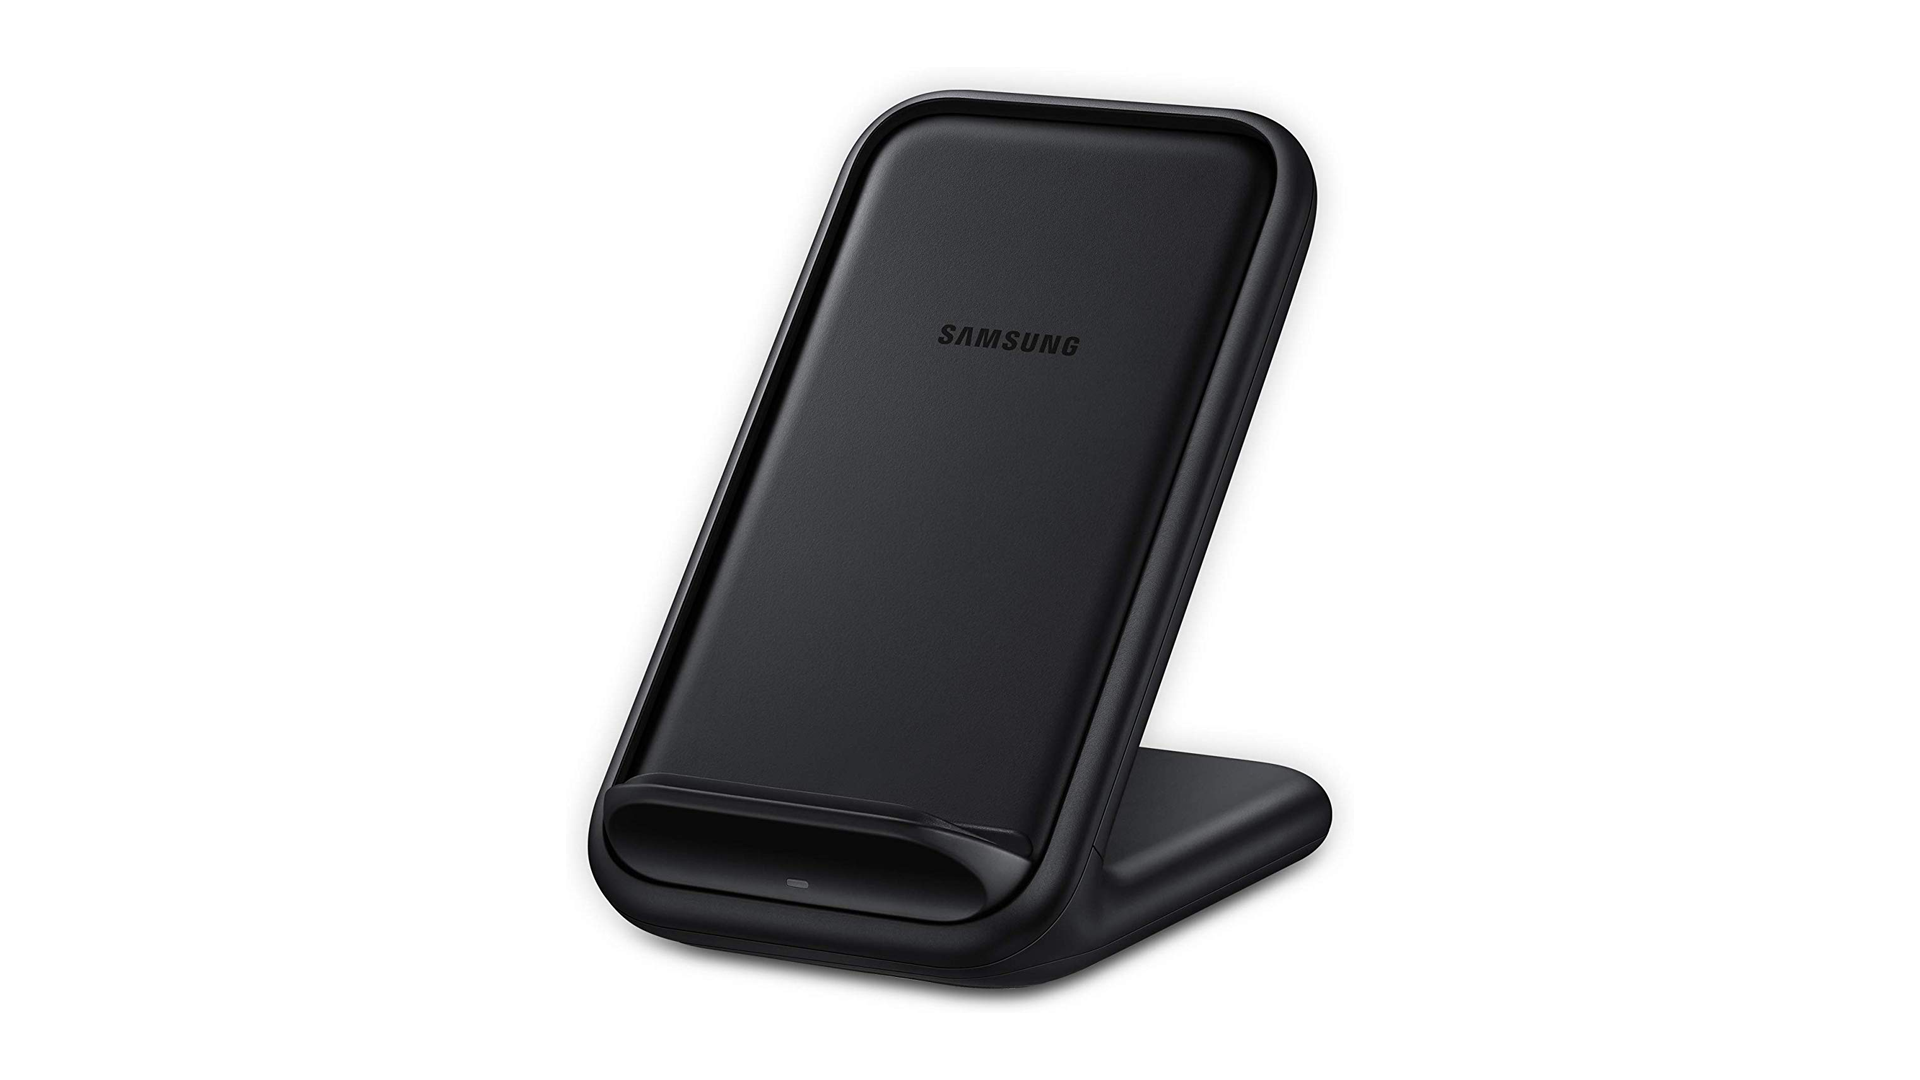 The Samsung wireless charging stand.